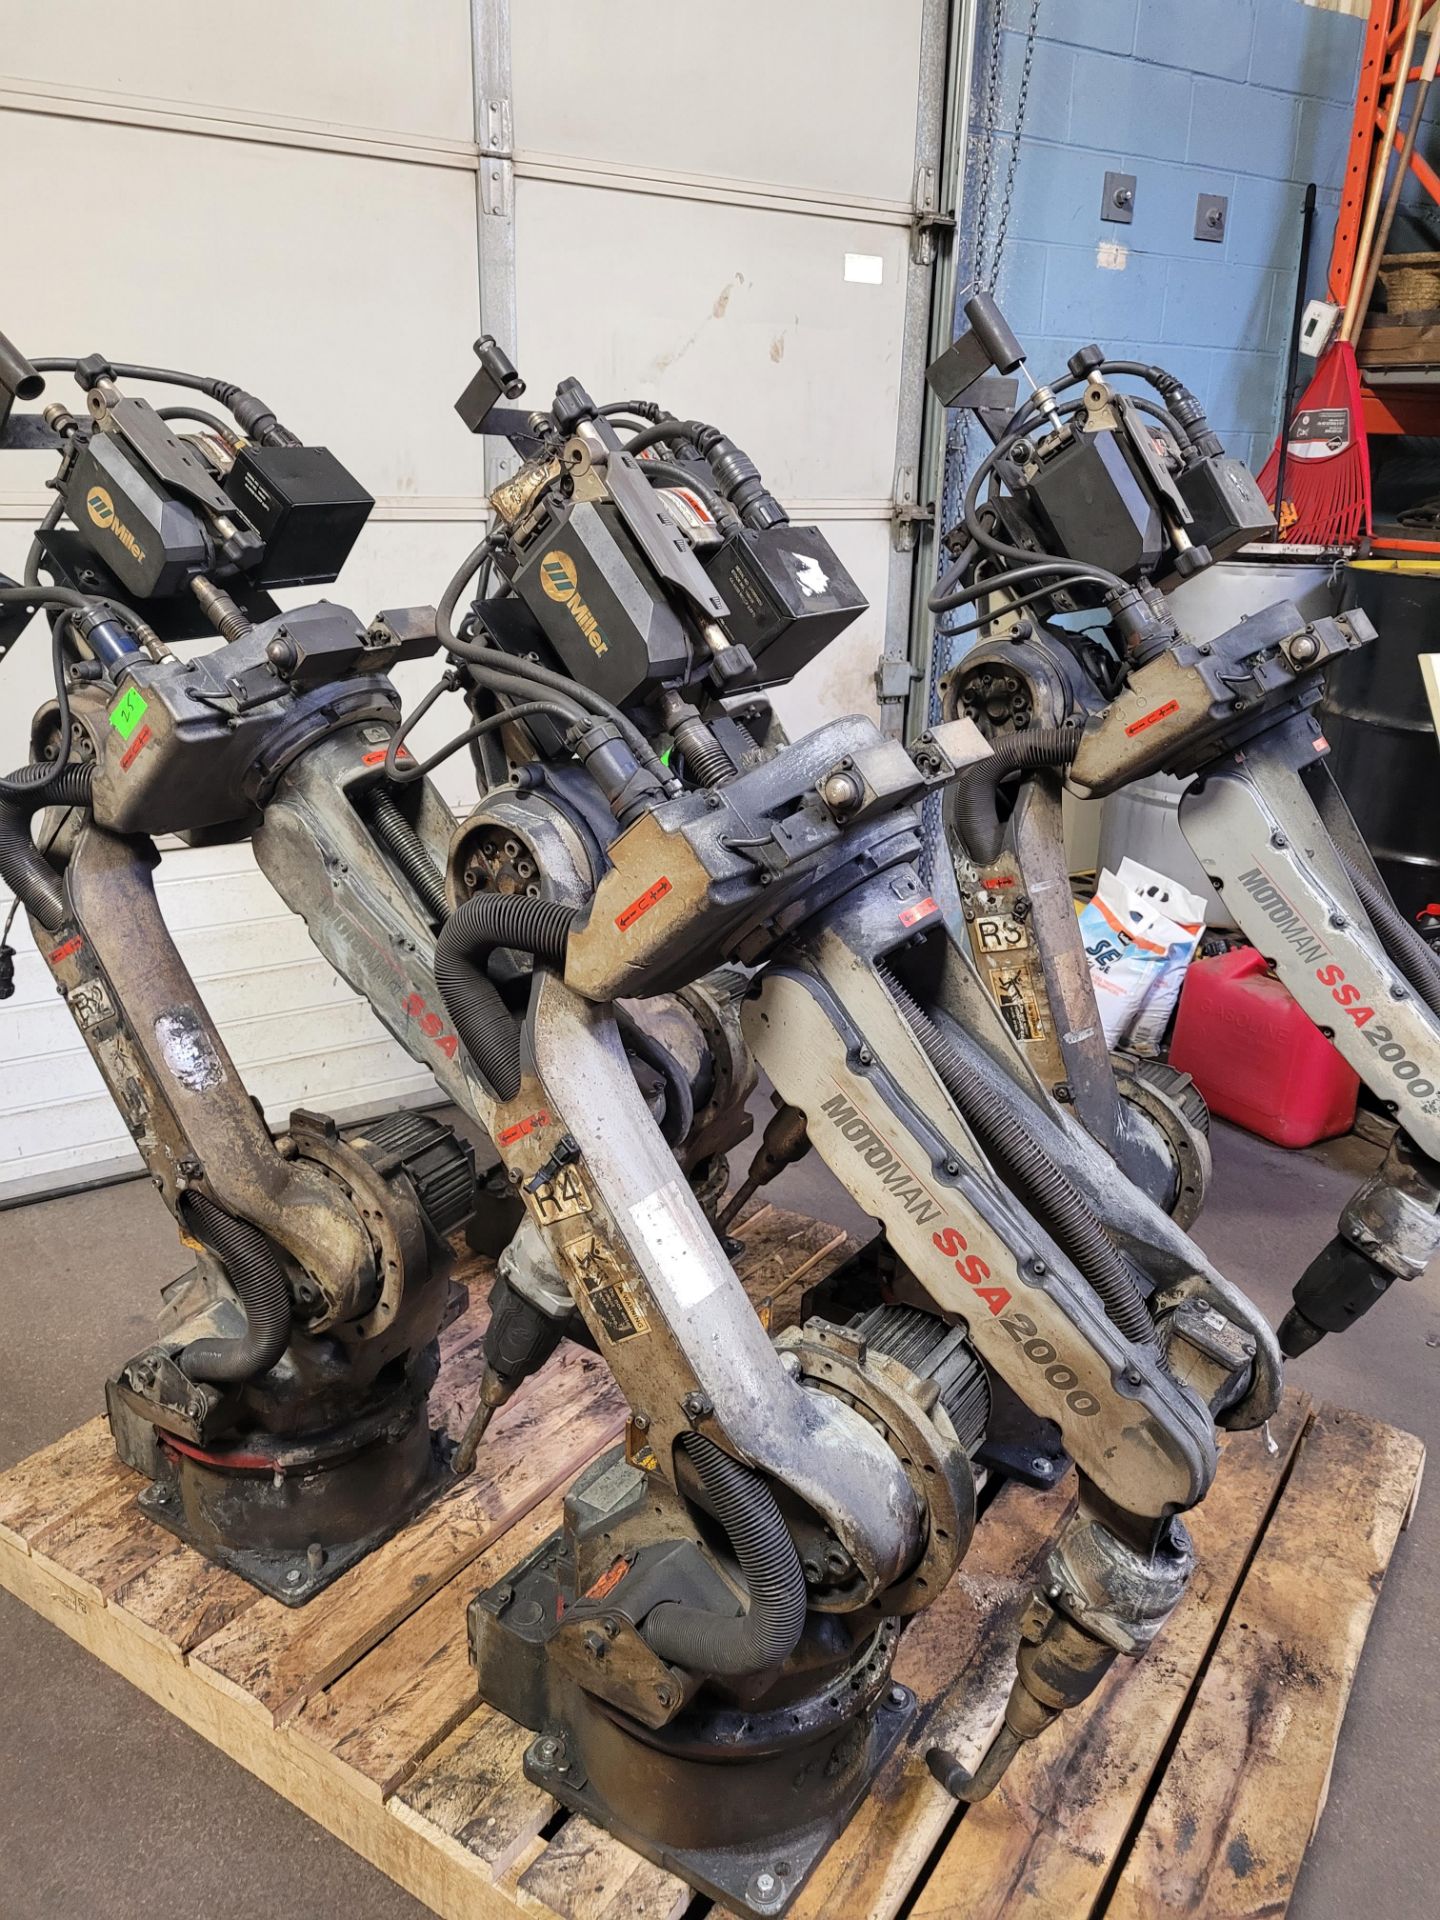 Lot of 4 (4 units) 2007 Motoman SSA 2000 Welding Robots Complete with Auto Axcess 450 Welding